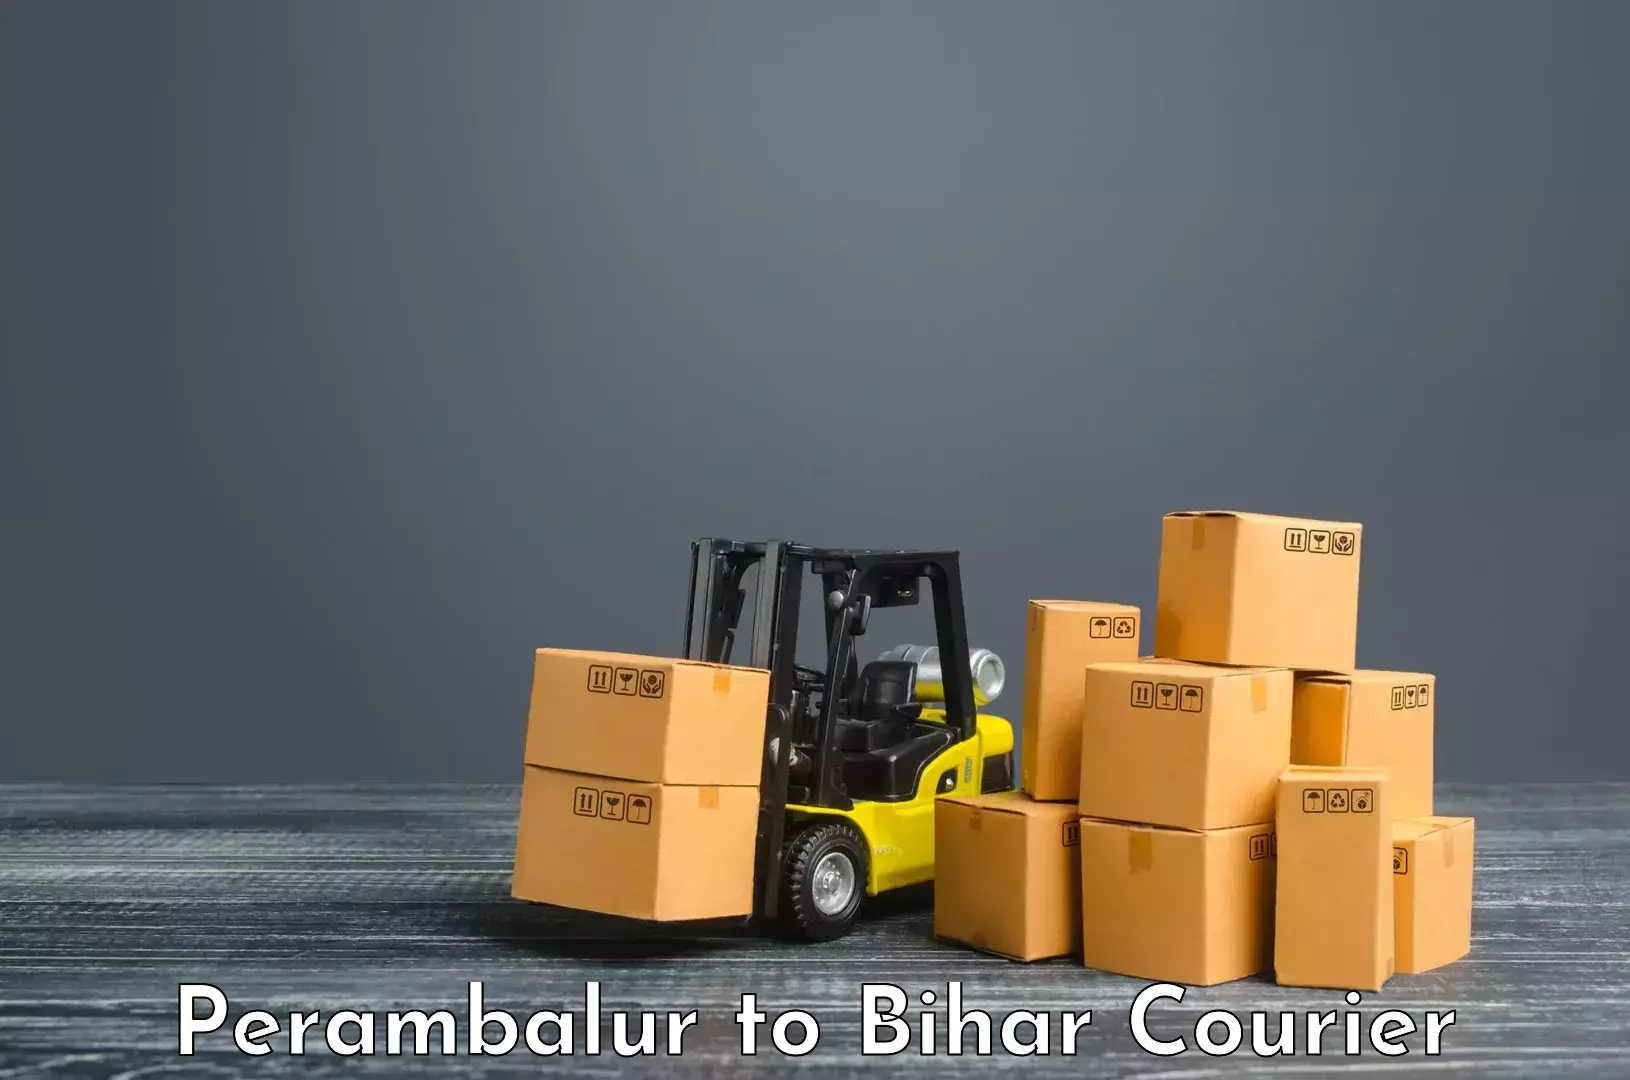 Sustainable courier practices Perambalur to Sheonar